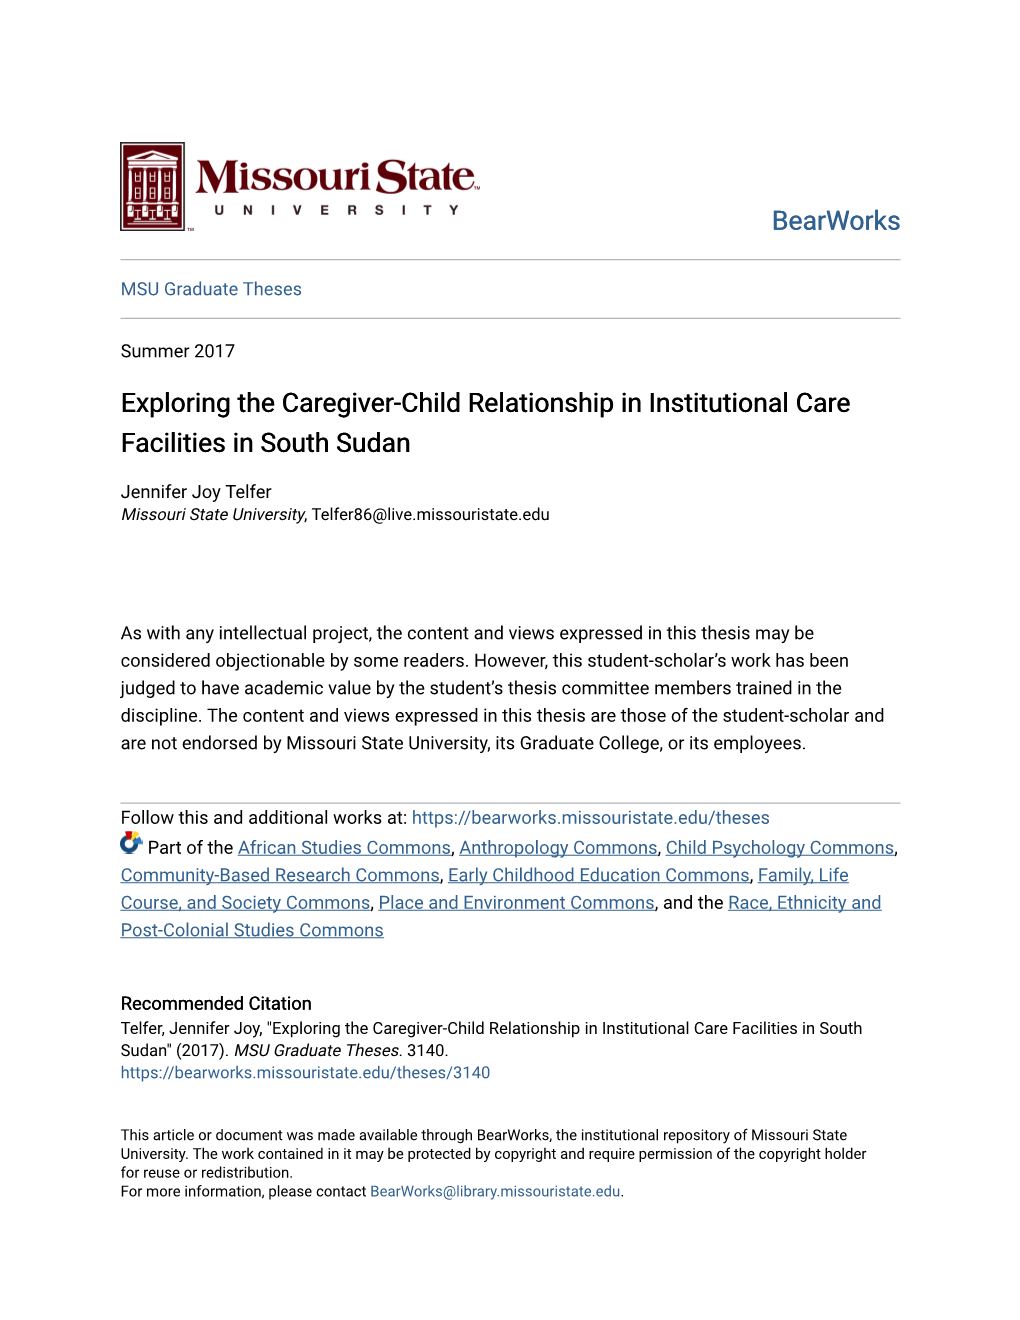 Exploring the Caregiver-Child Relationship in Institutional Care Facilities in South Sudan